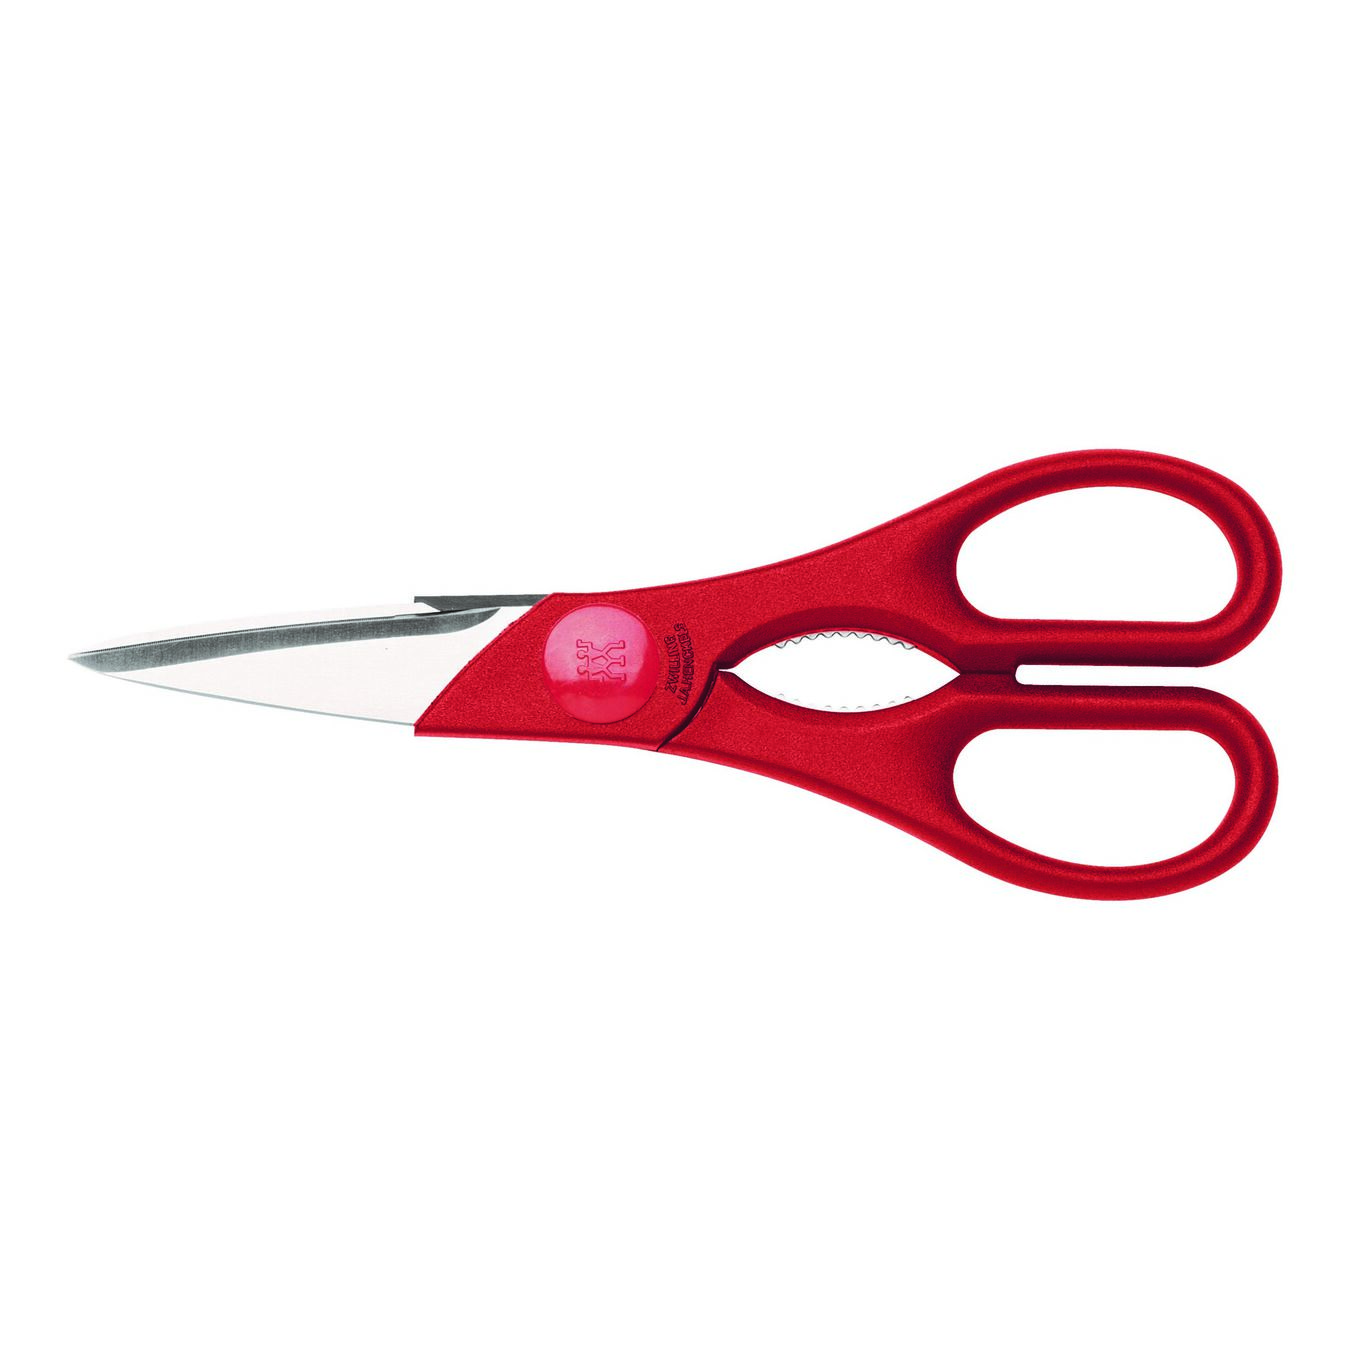 Stainless steel Multi-purpose shears red,,large 1